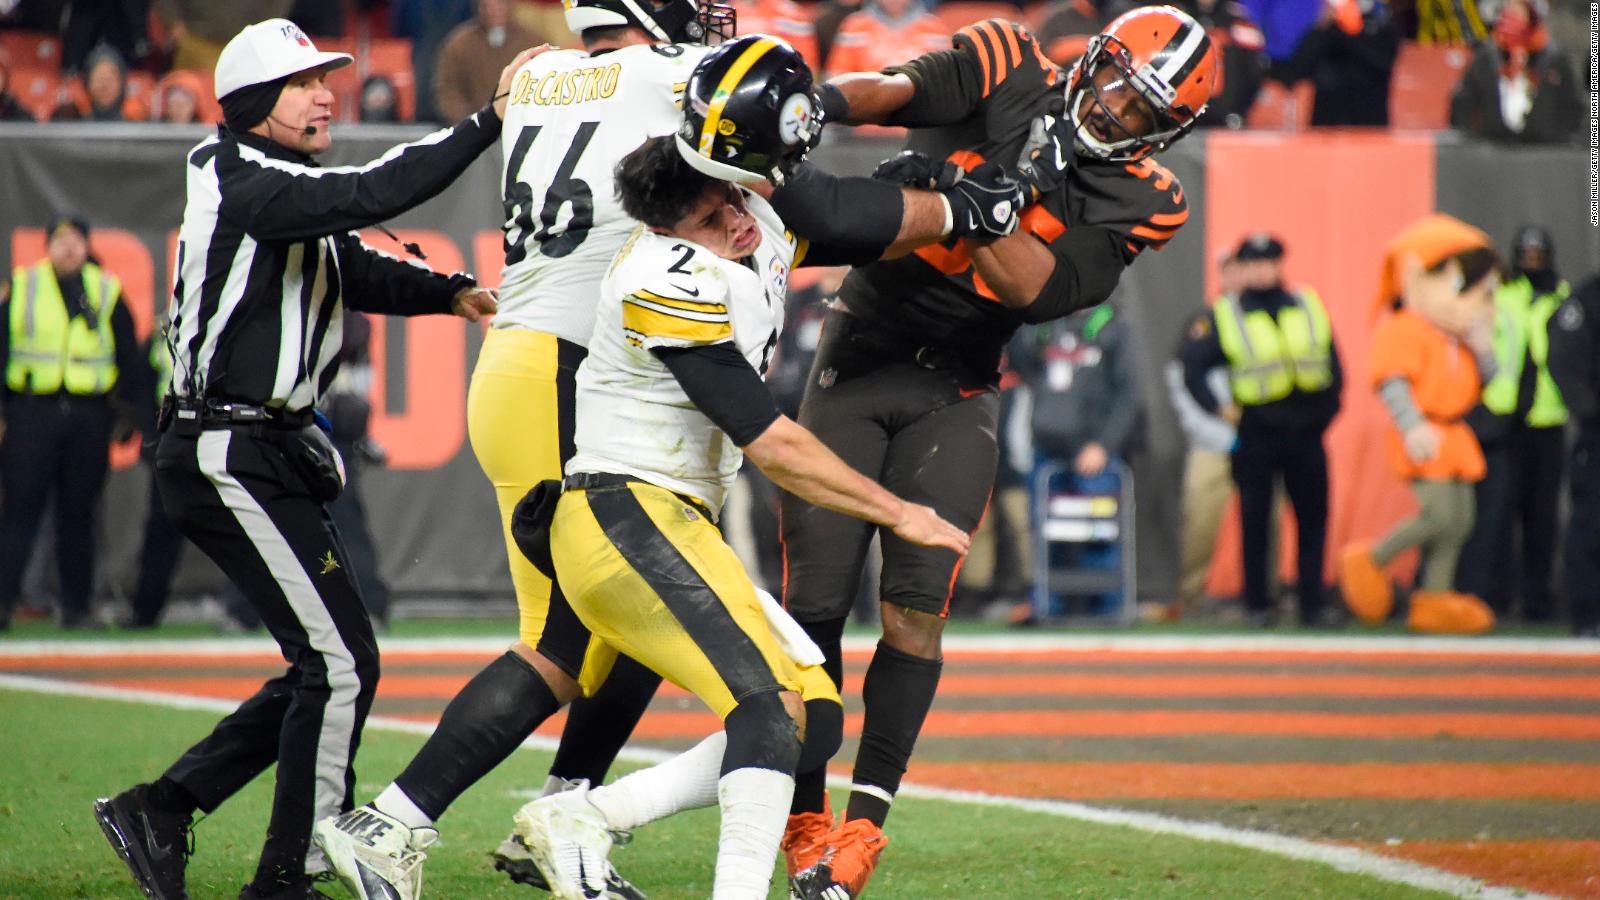 Myles Garrett Back With Cleveland Browns After Suspension For Hitting A Quarterback With His Own Helmet Cnn - who received suspensions in steeler brown brawl stars